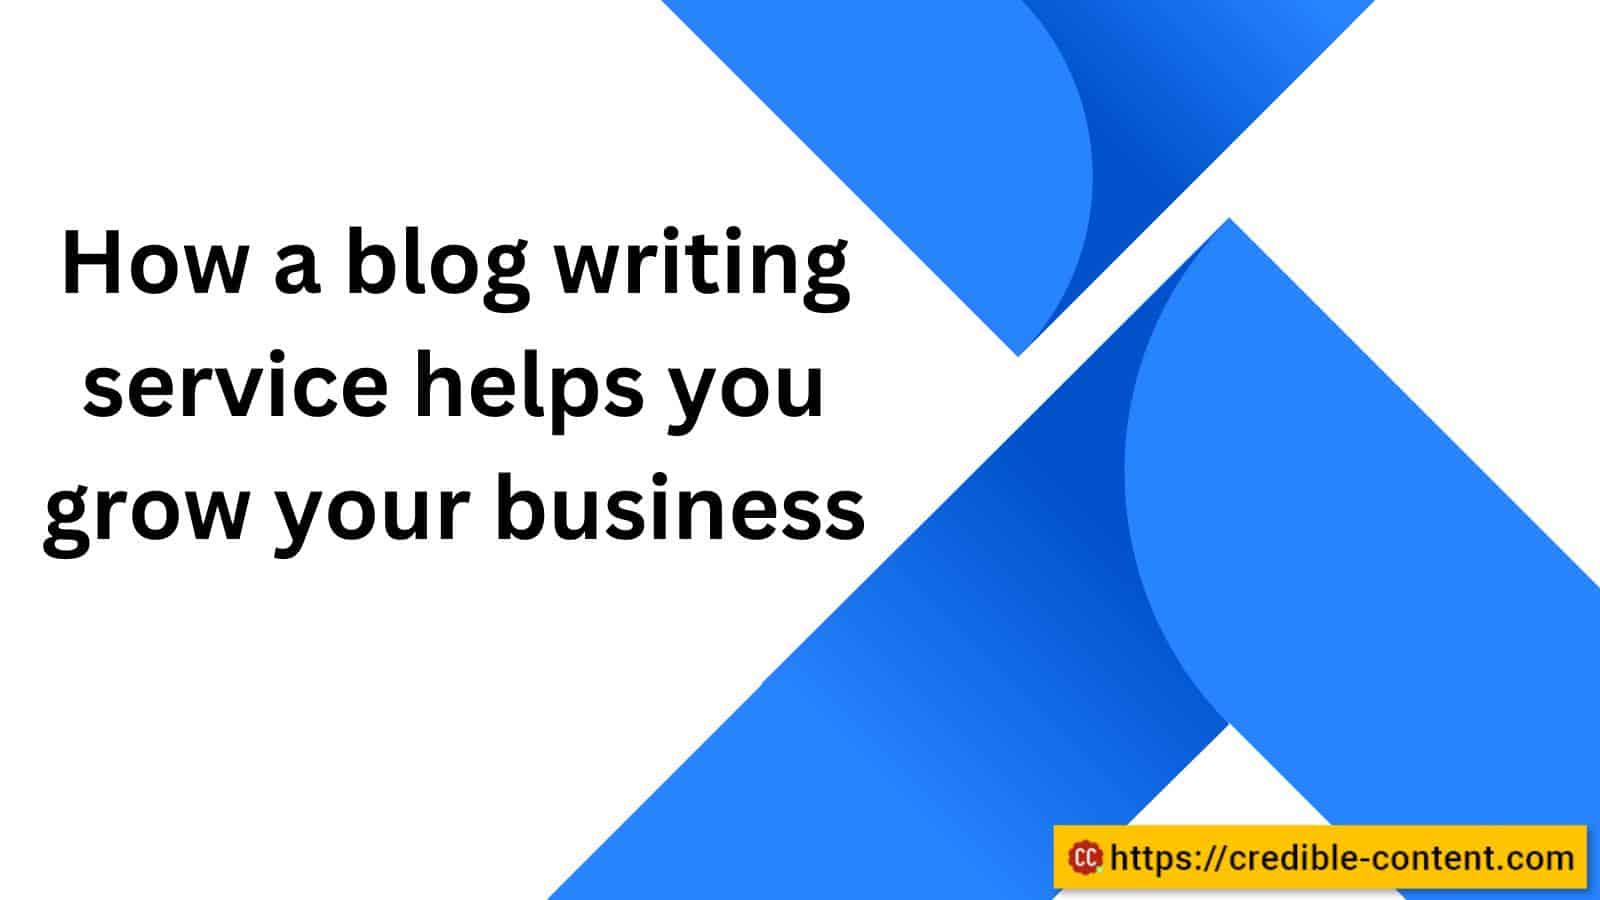 How a blog writing service helps you grow your business